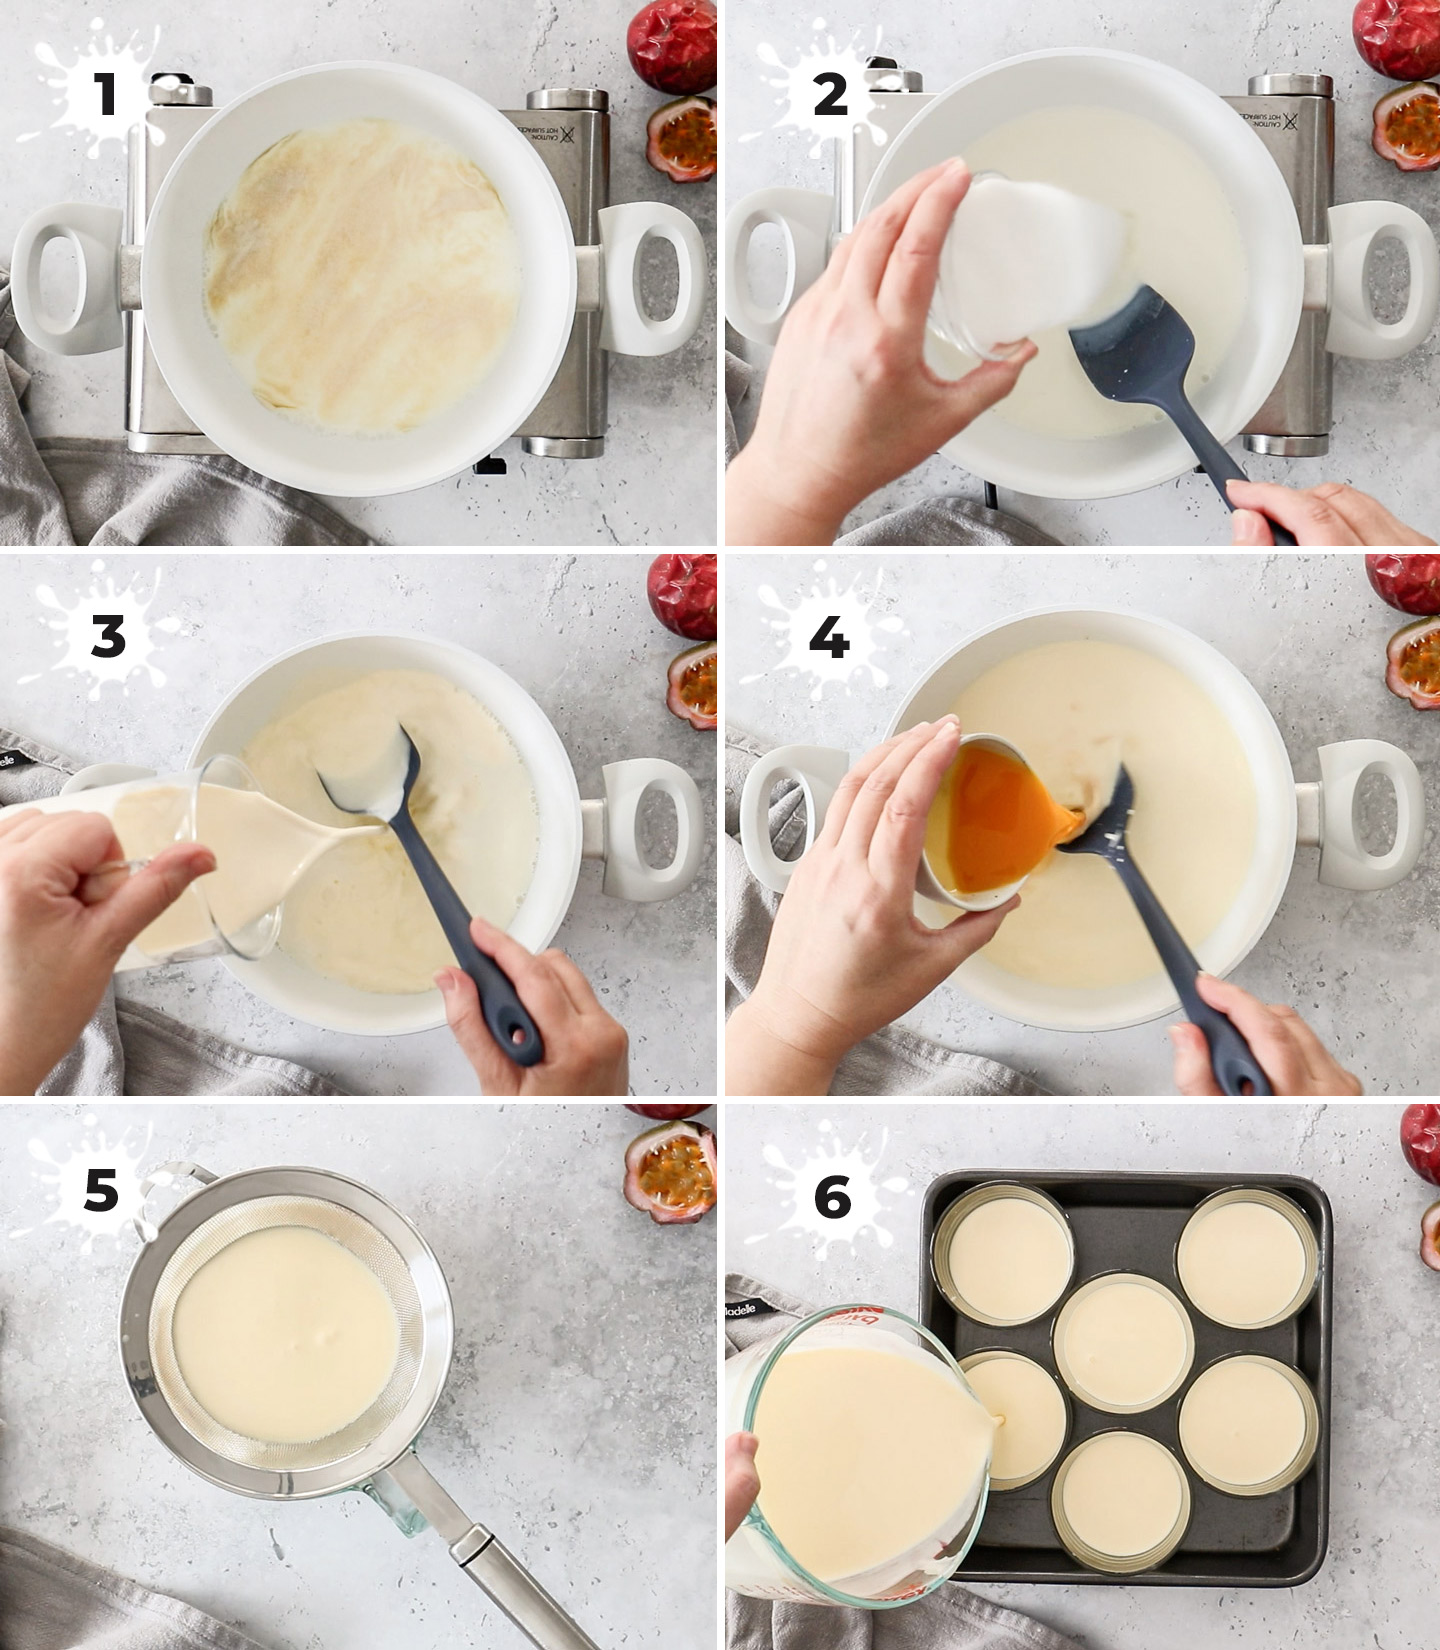 A collage showing how to make passionfruit panna cotta.